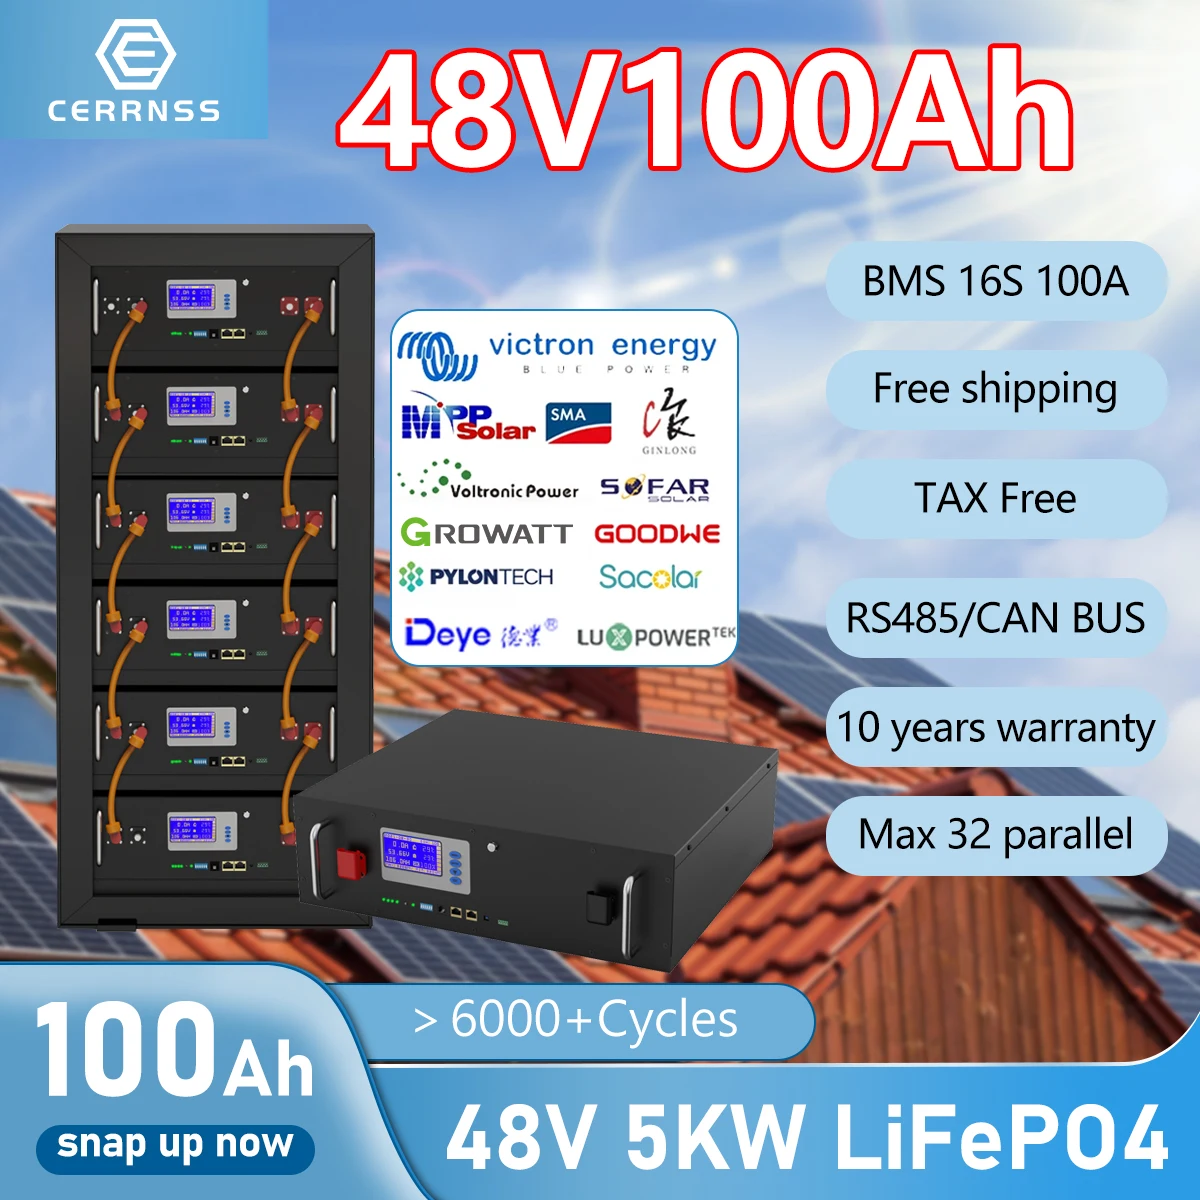 

48V 5KW 100AH LiFePO4 Battery Pack Lithium Solar Battery 6000+ Cycles RS485 CAN 16S 100A BMS Max 32 Parallel For Inverter NO TAX